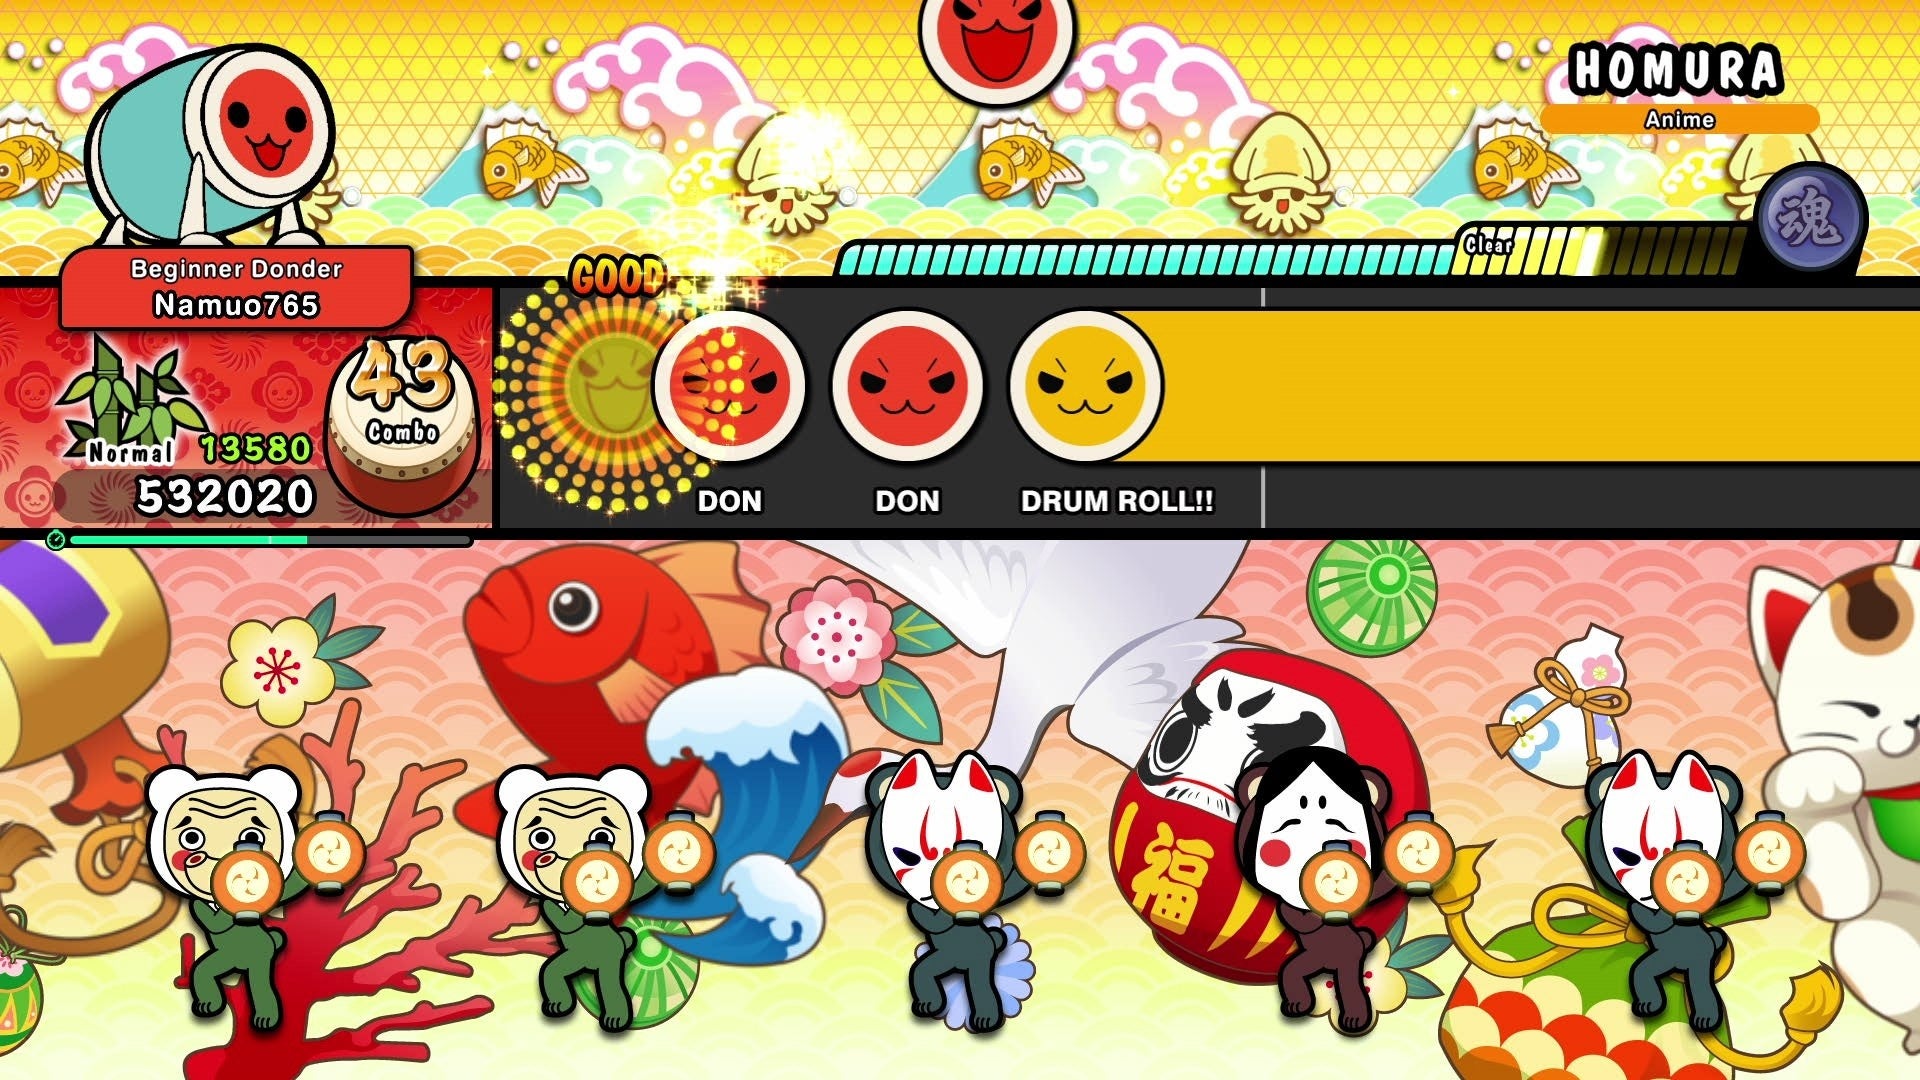 A screenshot of Taiko no Tatsujin, a rhythm game, which has Japanese business men drawing at the bottom in a colourful scene and a bar of drum beats at the top.